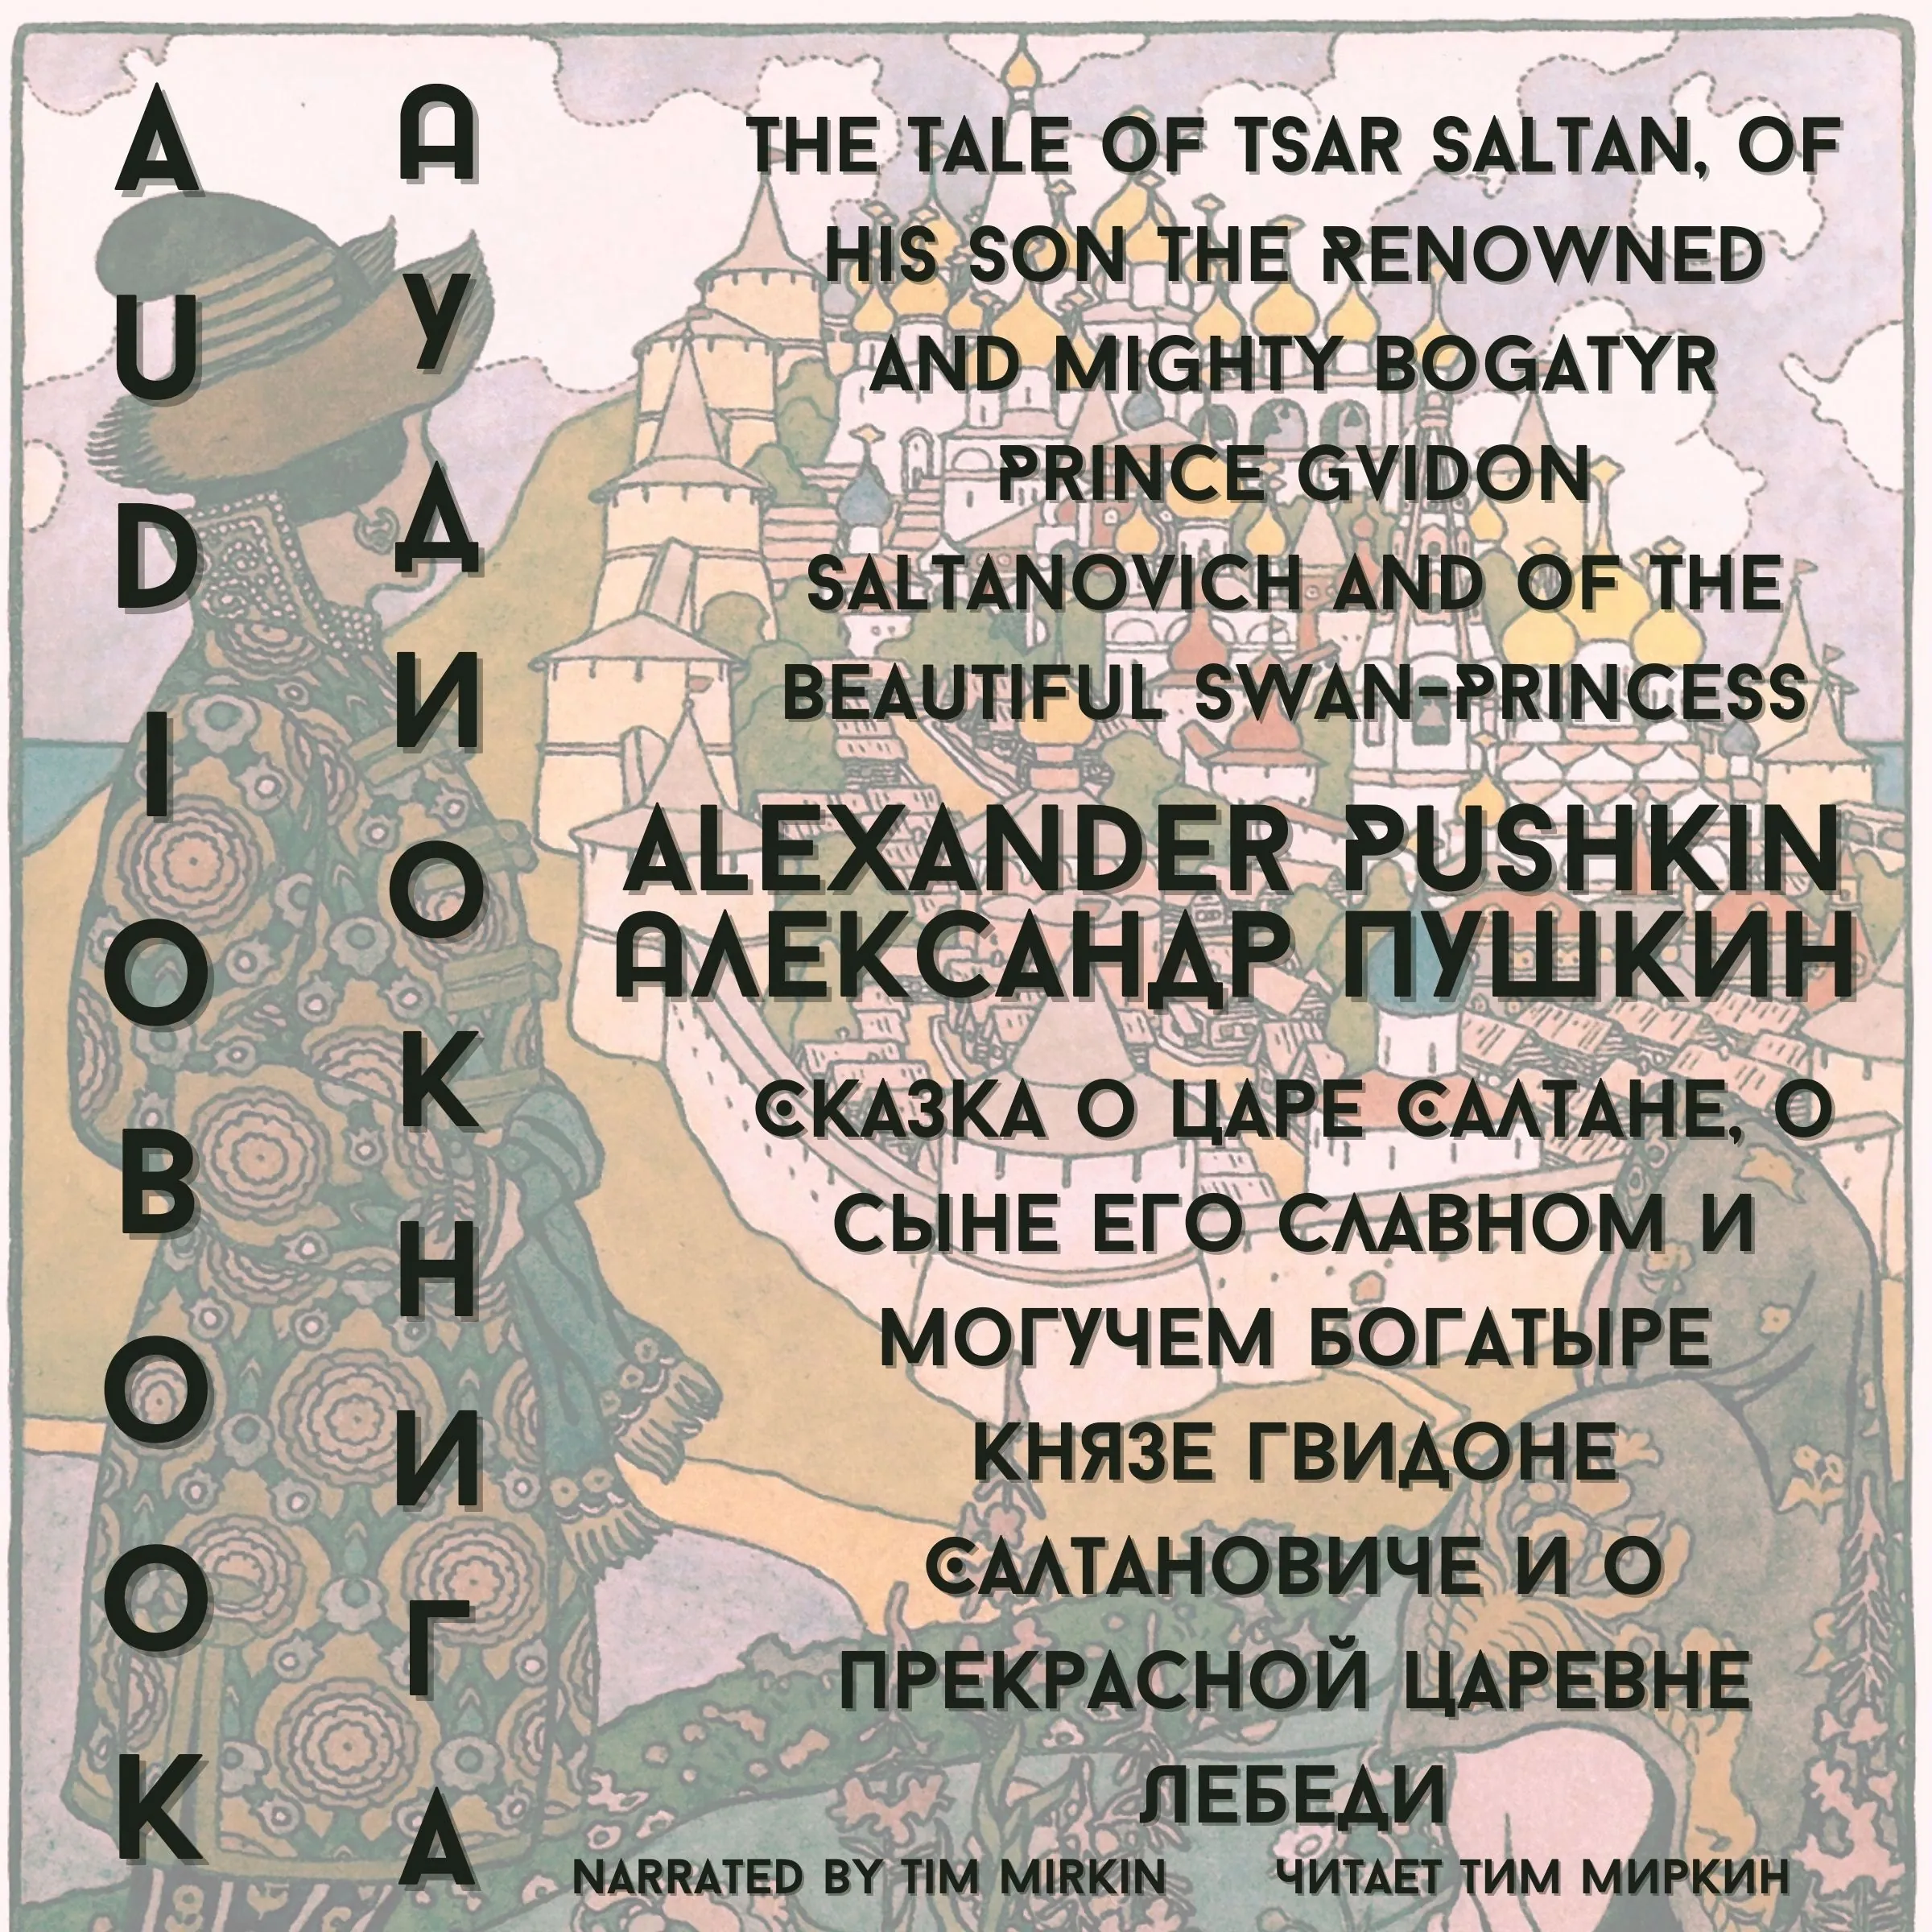 The Tale of Tsar Saltan, of His Son the Renowned and Mighty Bogatyr Prince Gvidon Saltanovich and of the Beautiful Swan-Princess Audiobook by Alexander Sergeyevich Pushkin